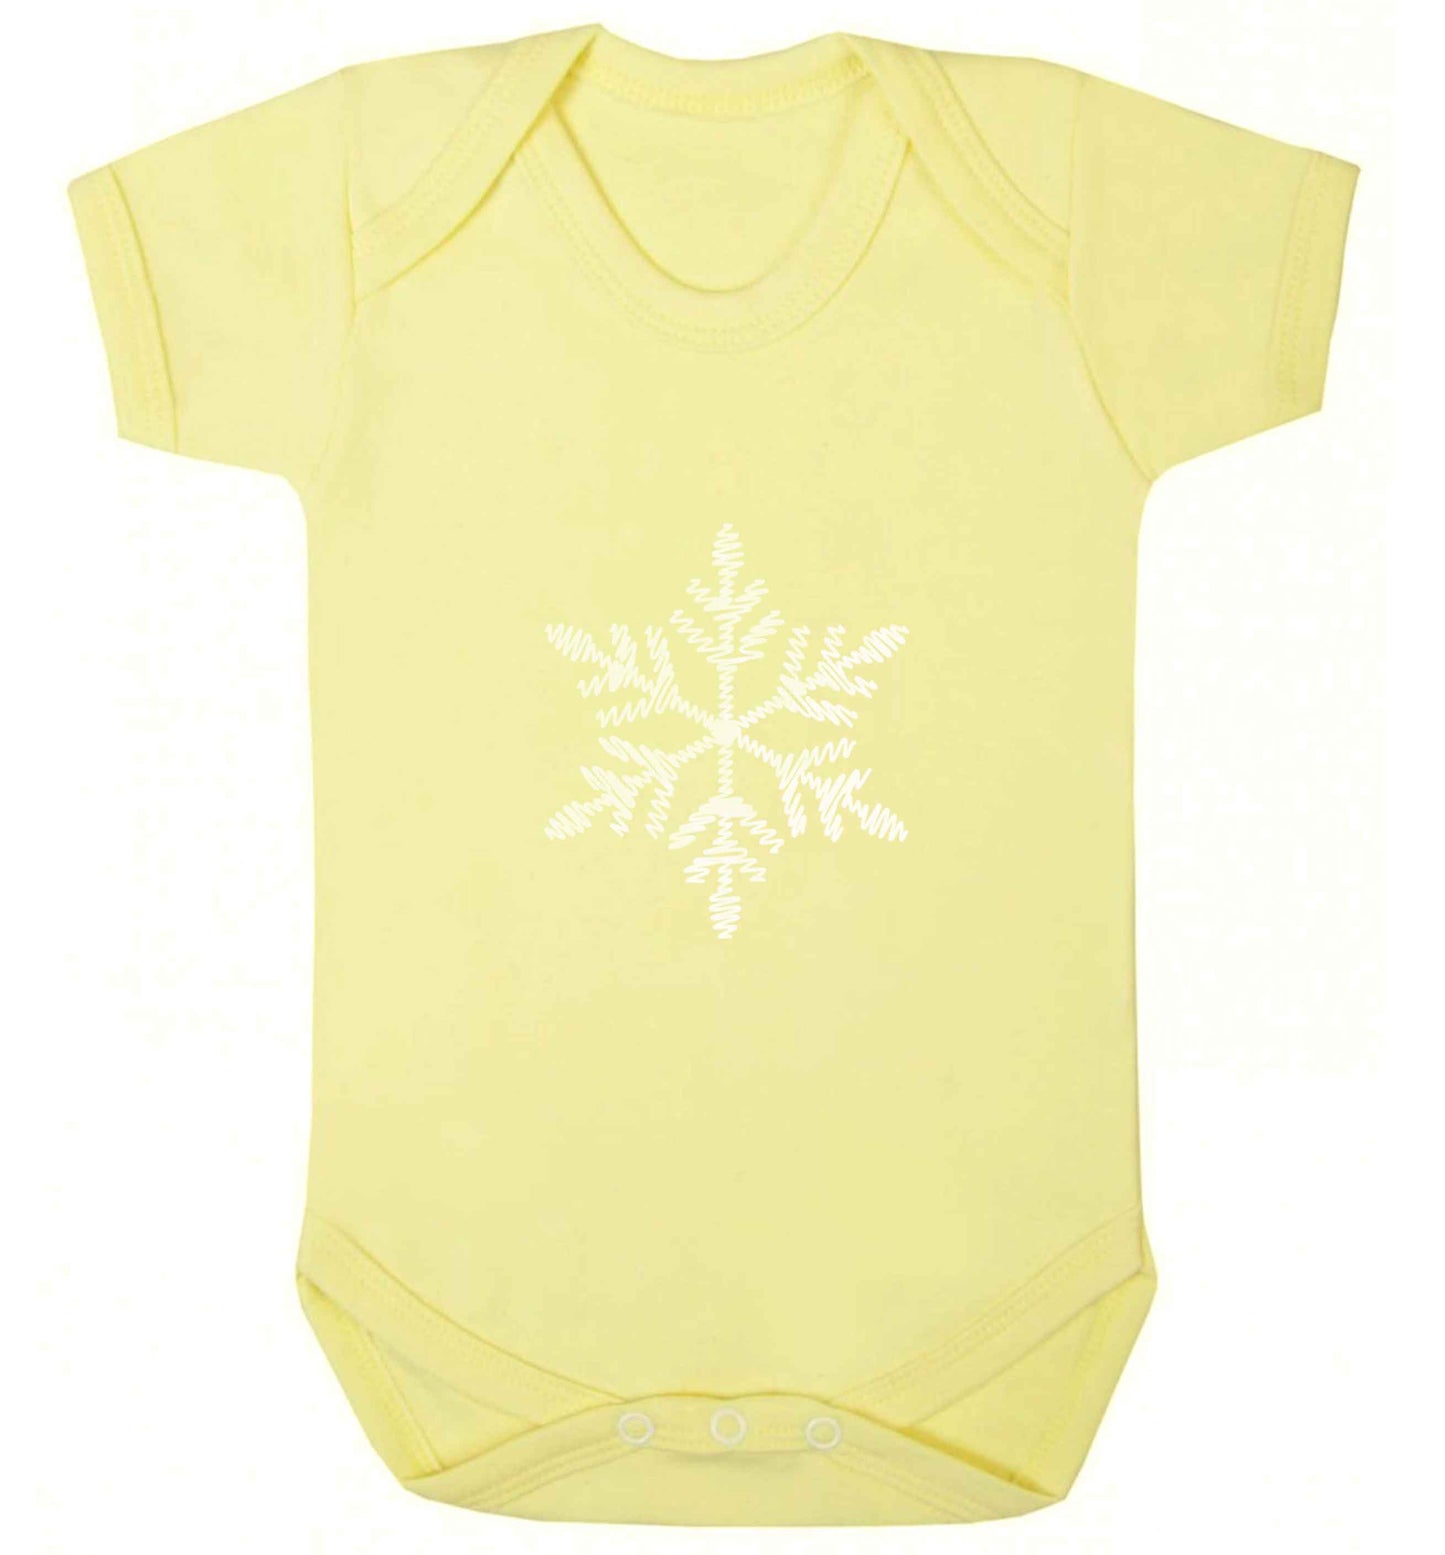 Snowflake baby vest pale yellow 18-24 months